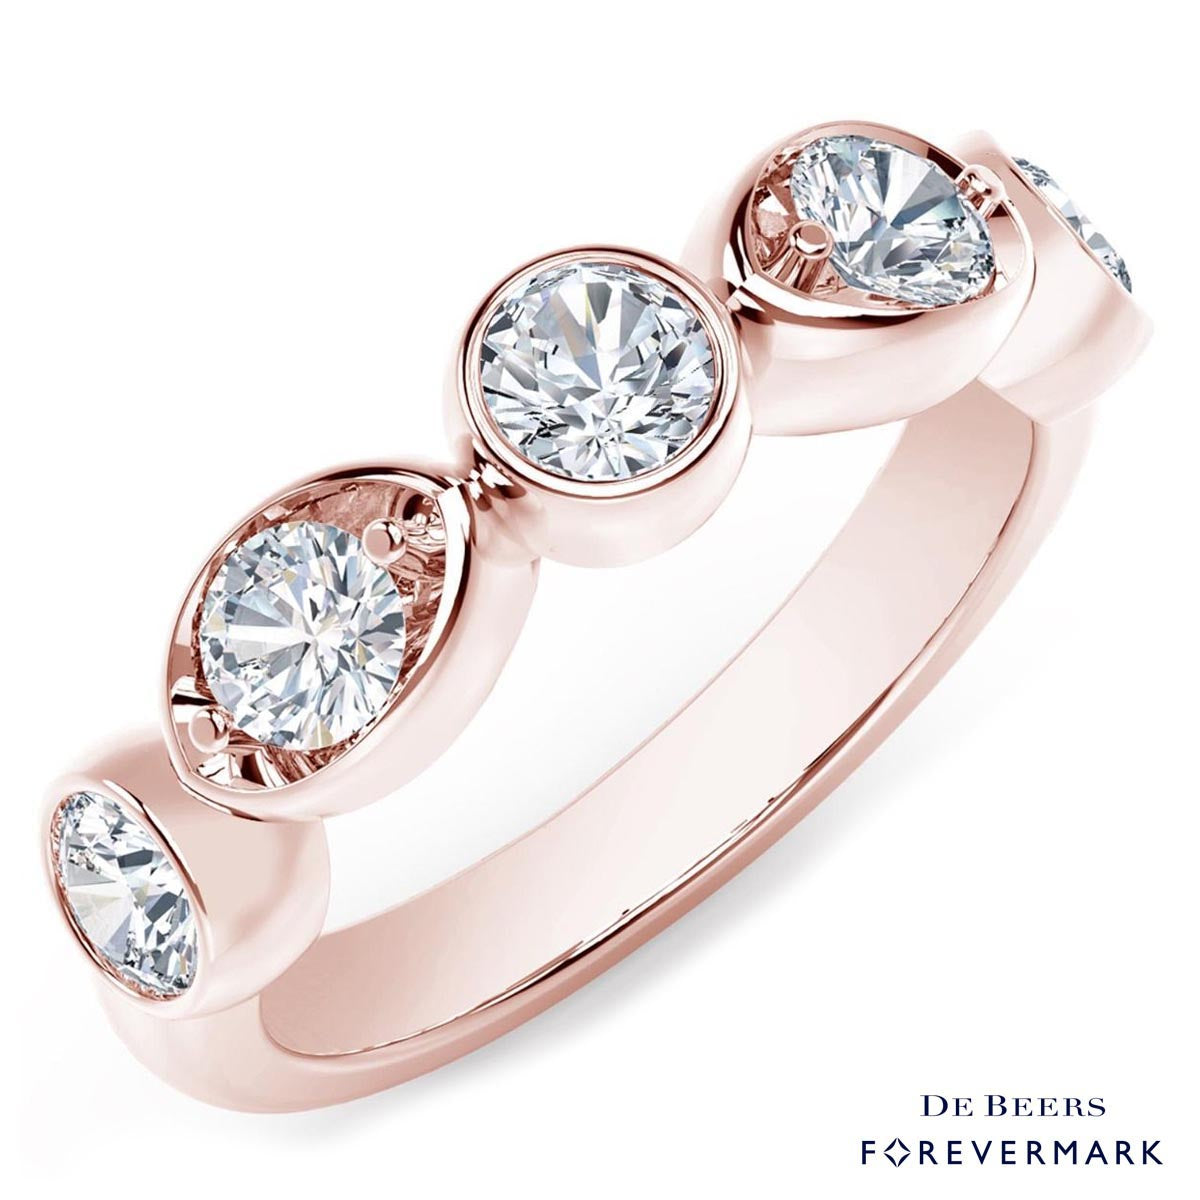 De Beers Forevermark Tribute Collection Diamond Stackable Ring in 18kt Rose Gold (1/2ct tw)